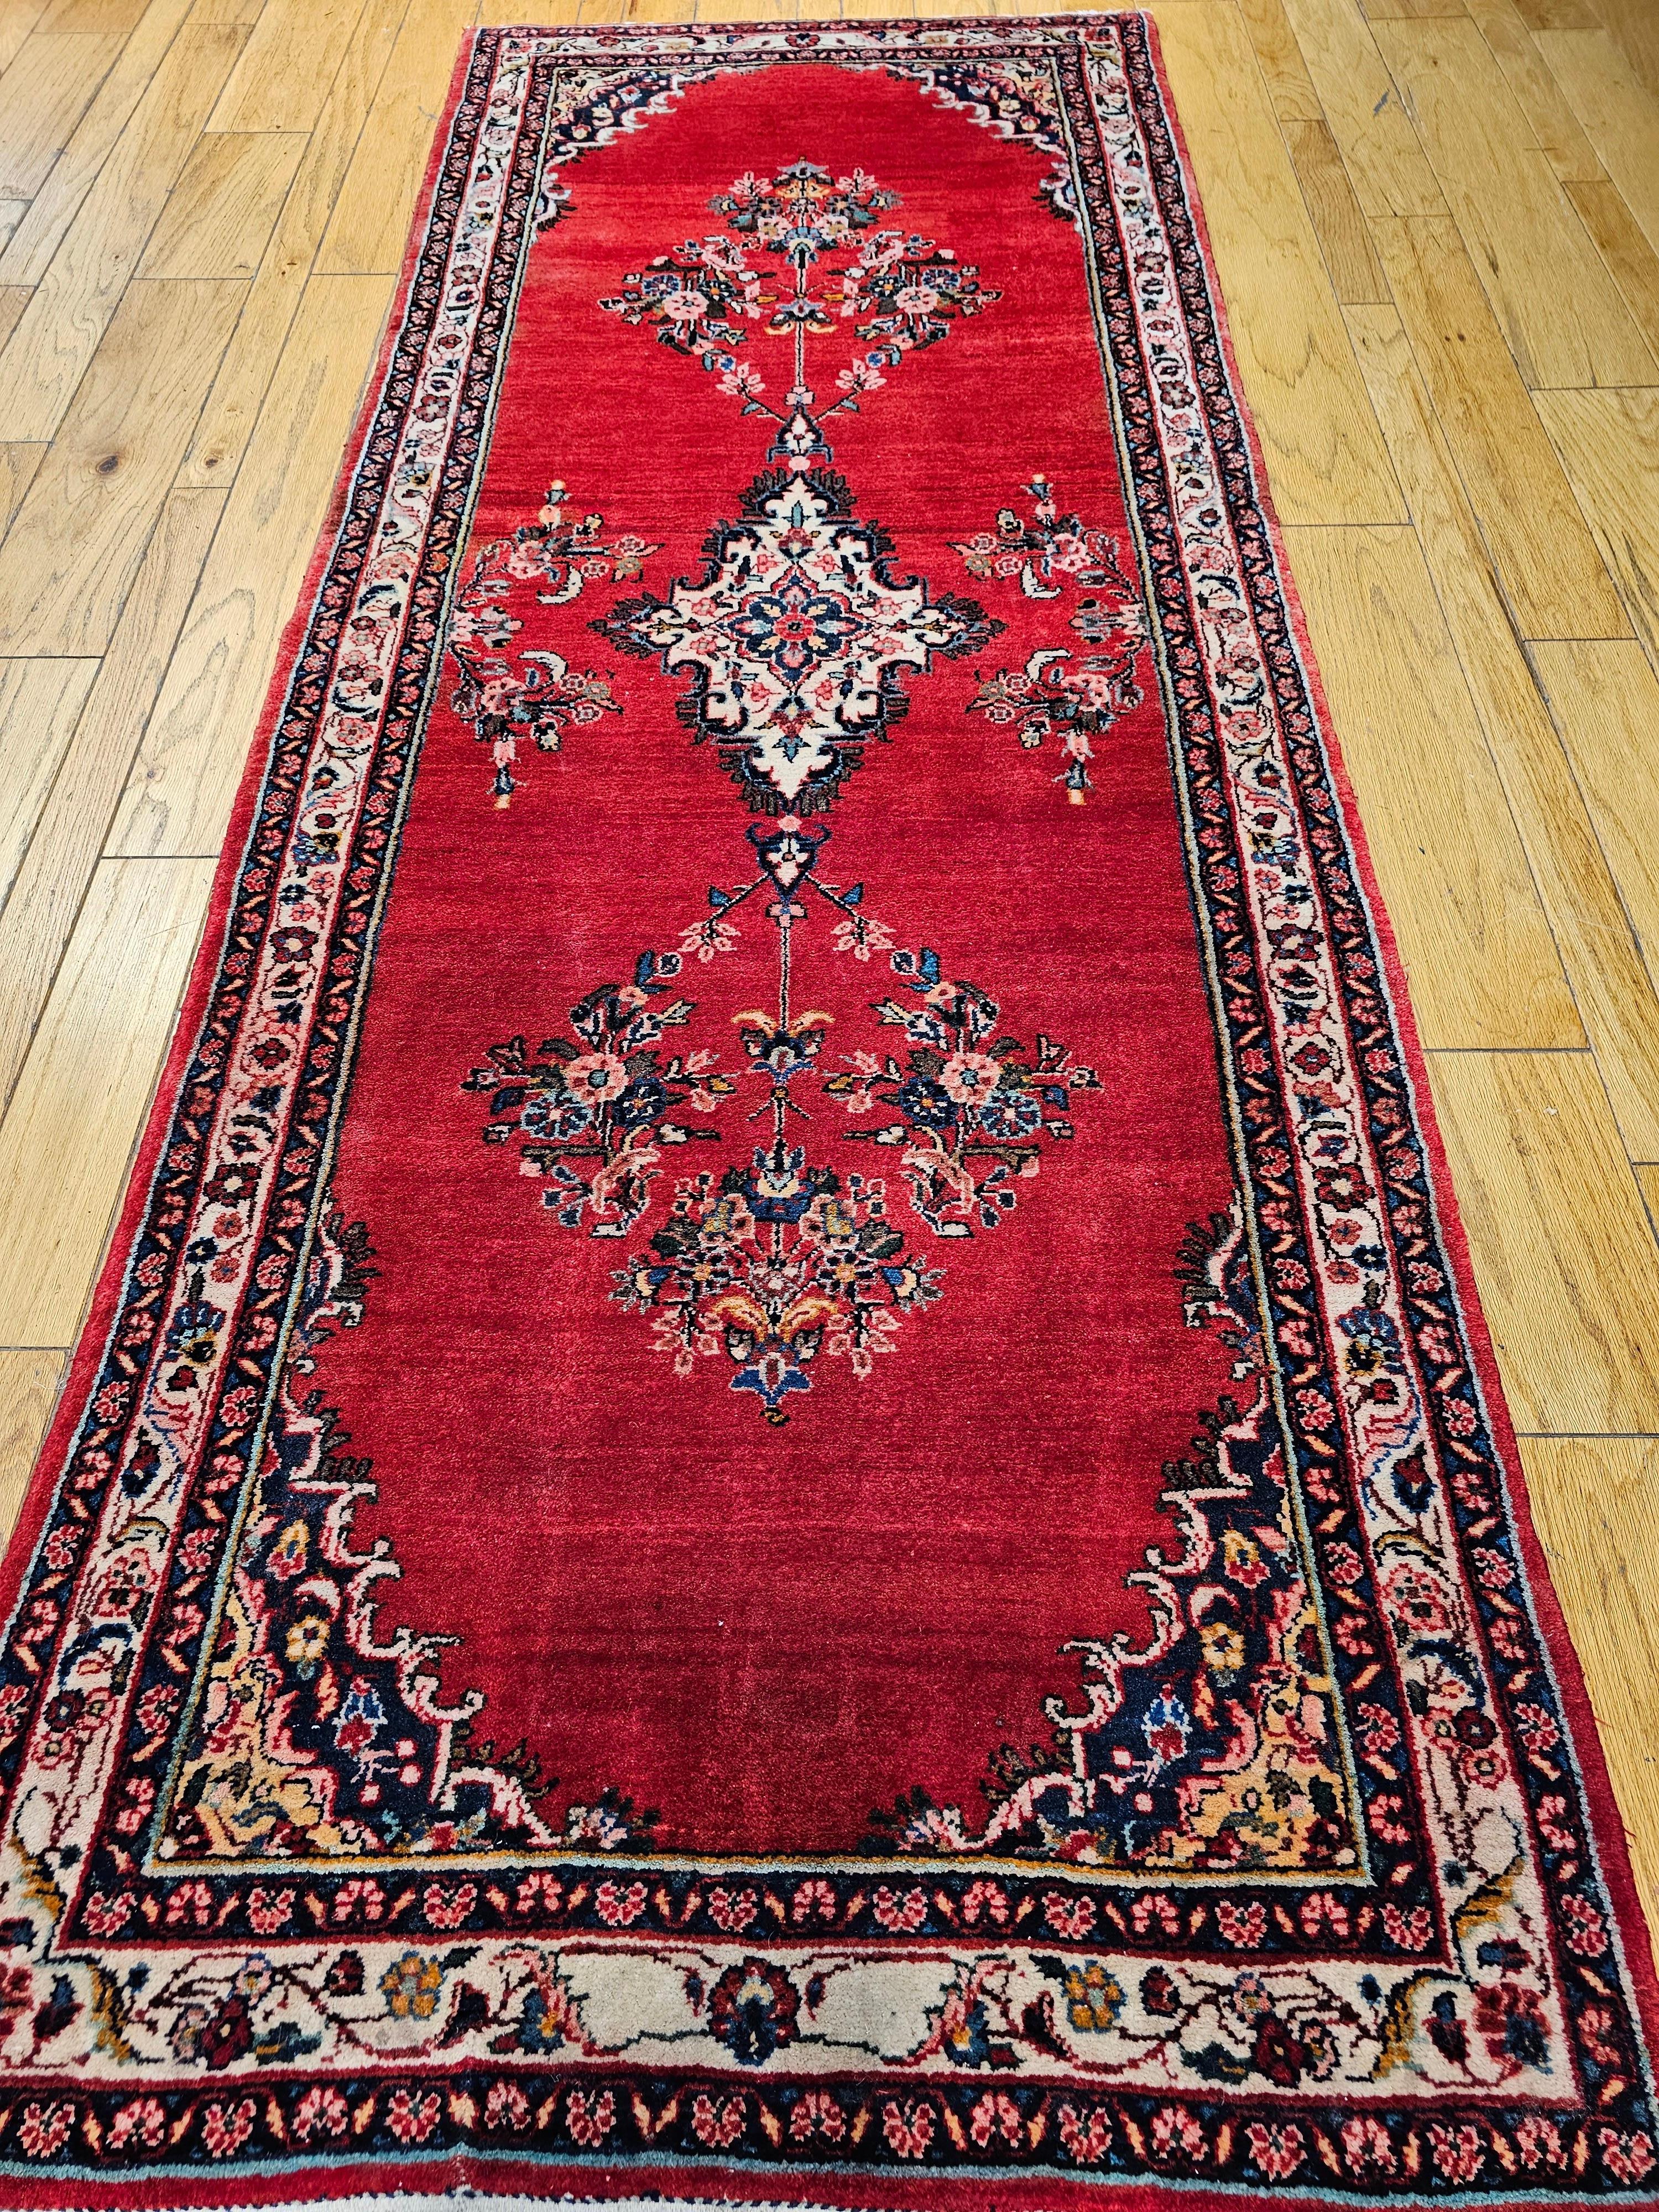  Hamadan wide runner from Western Persia is in a brilliant red color field.  It has a small central medallion in a cream color.  The border is also in a cream color and designs in red, green, blue, and yellow throughout the border.  The runner has a